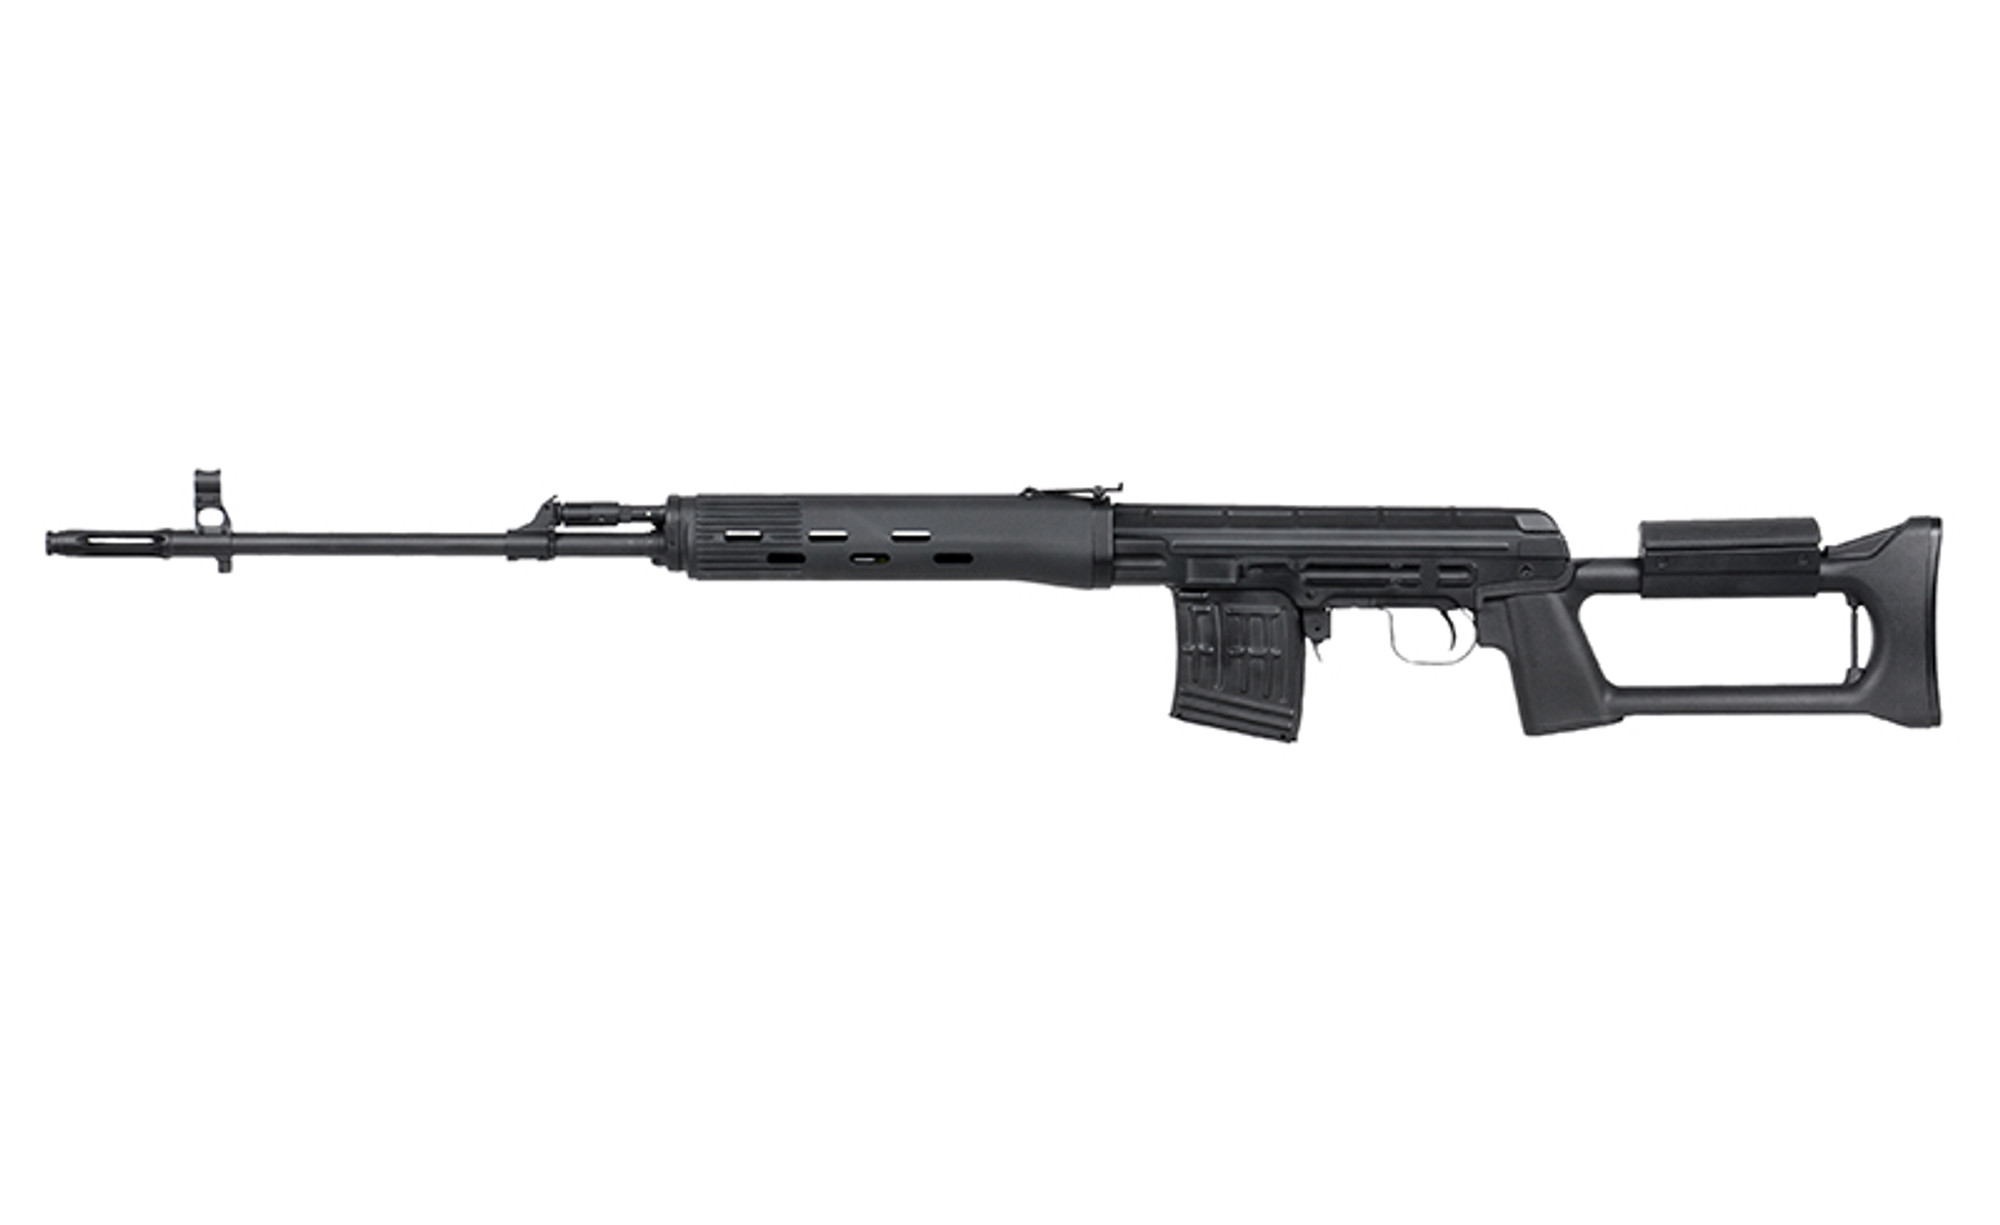 CYMA Aluminum Receiver SVD-S Airsoft AEG High Power Sniper Rifle w/ Fixed Stock